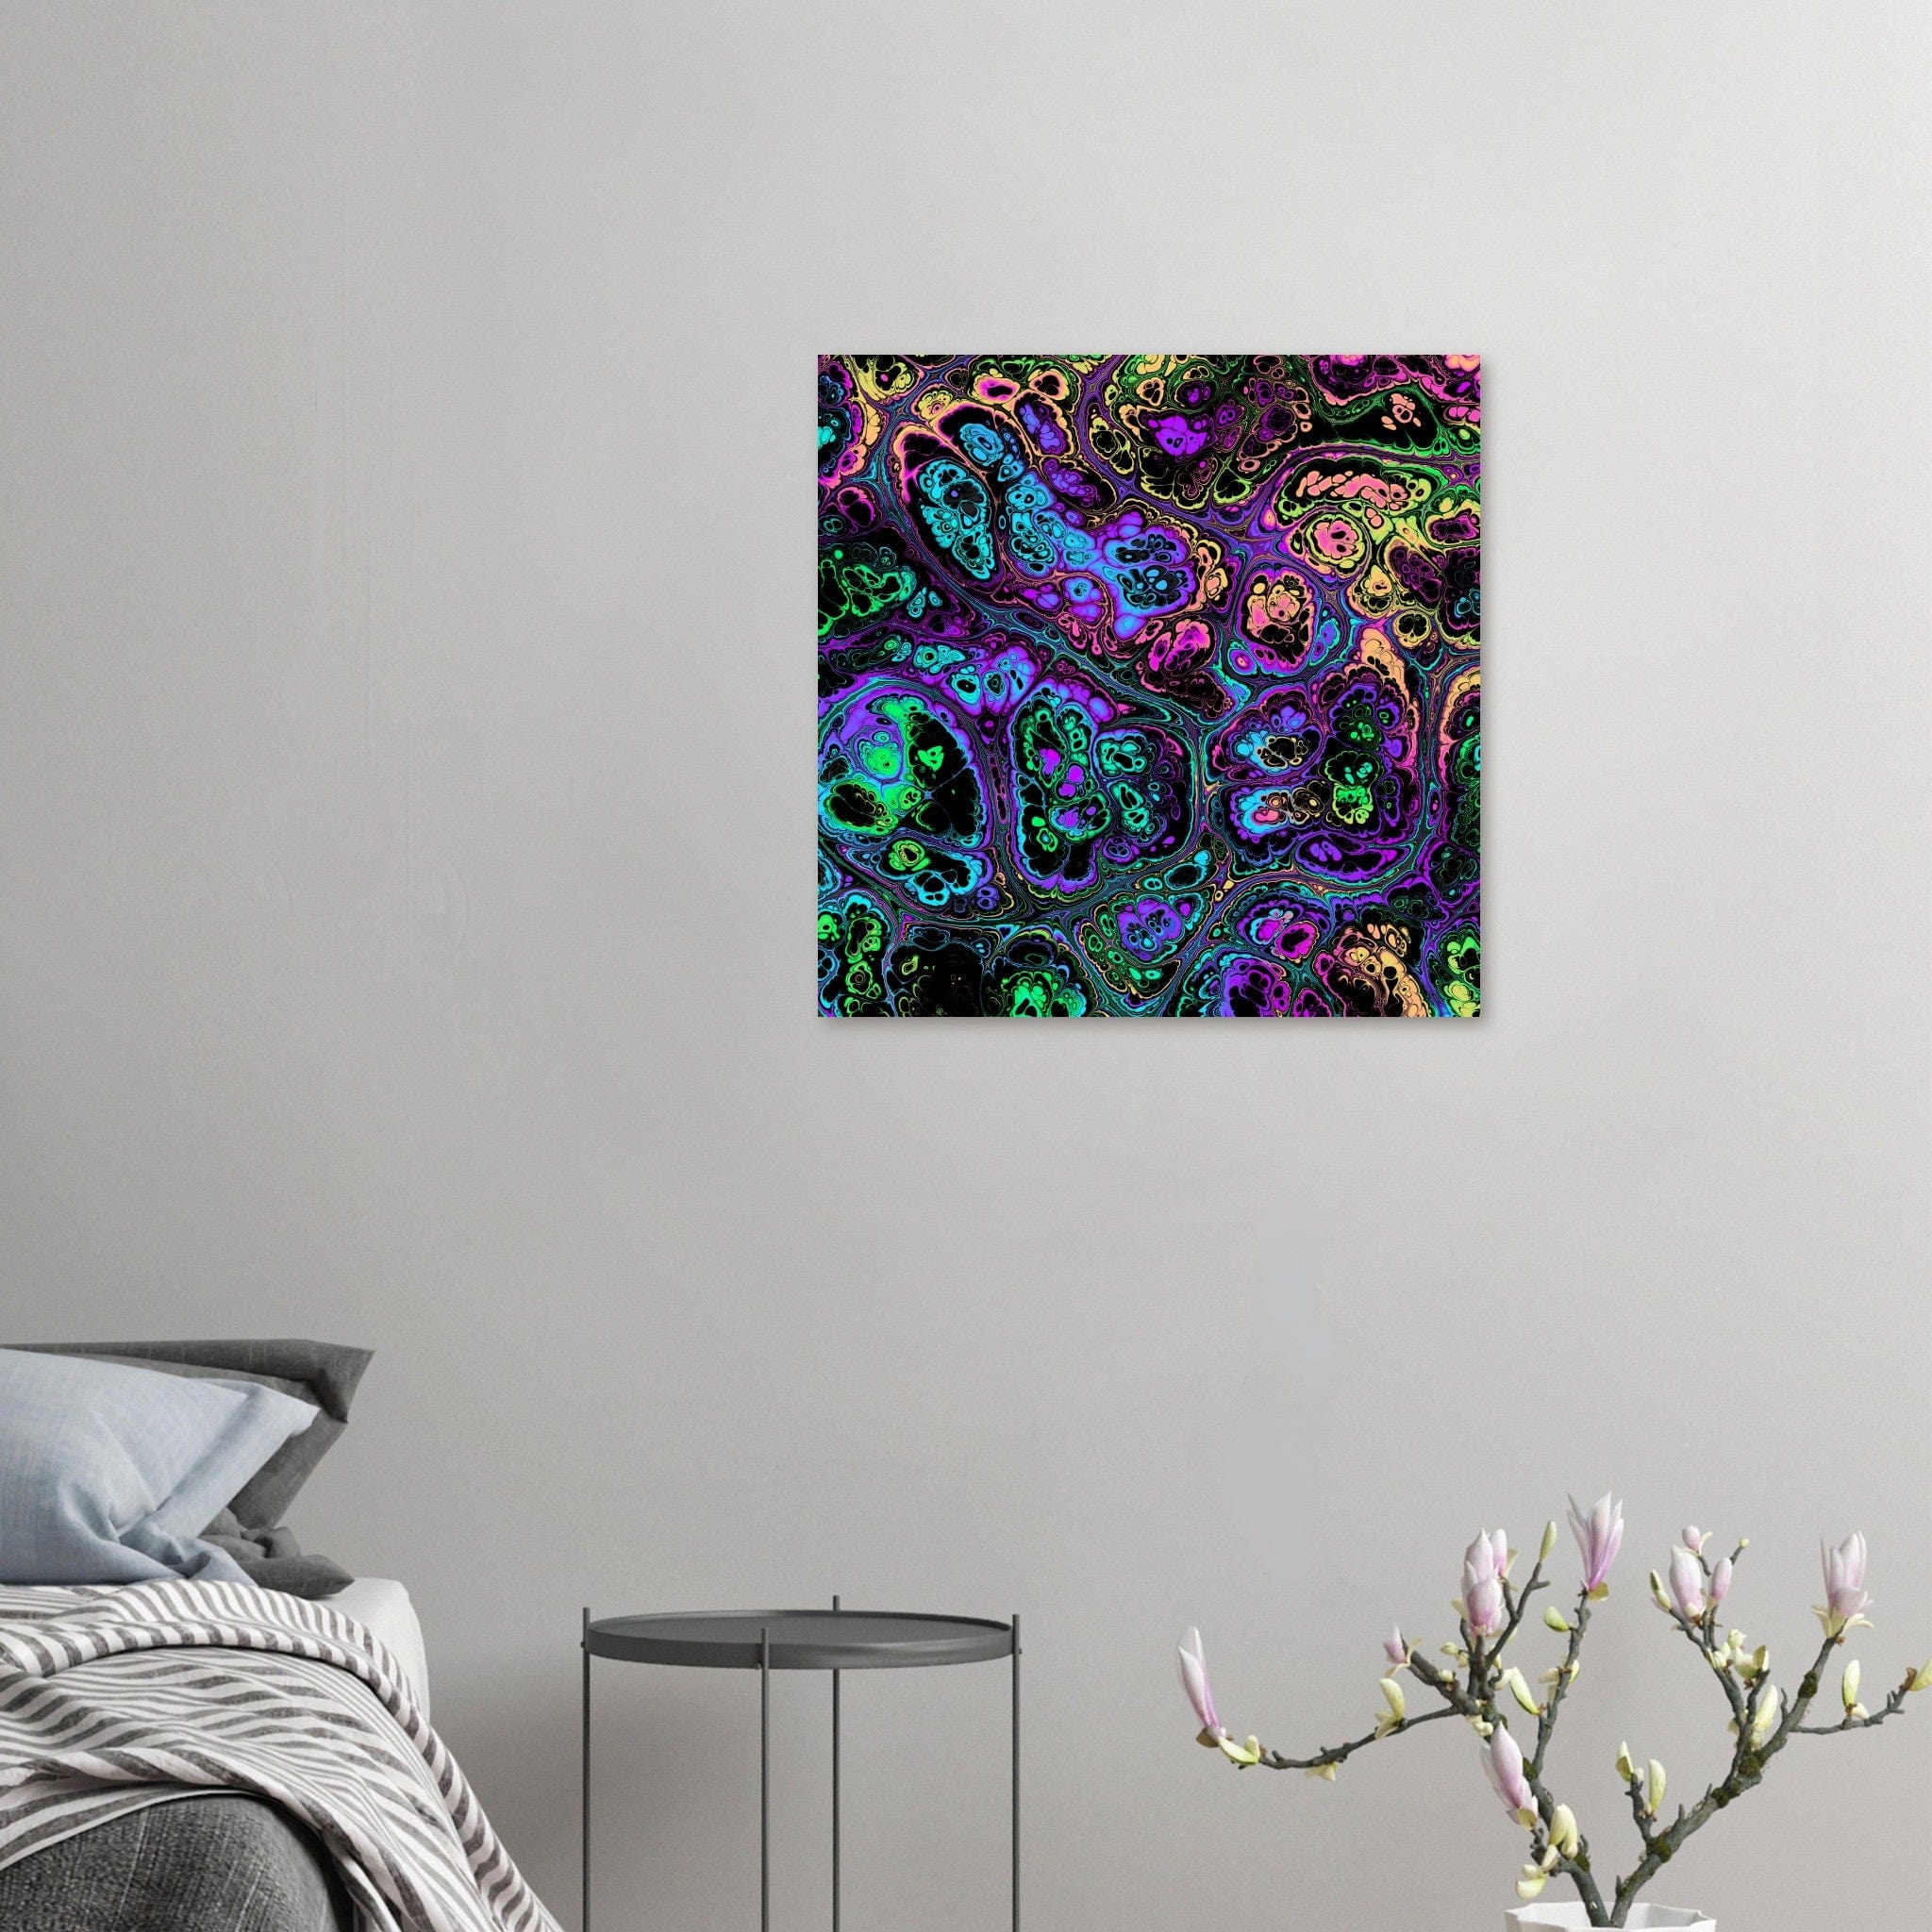 Little Squiffy Print Material 60x60 cm / 24x24″ / Horizontal Neon Psychedelic Marble Aluminum Print Wall Art